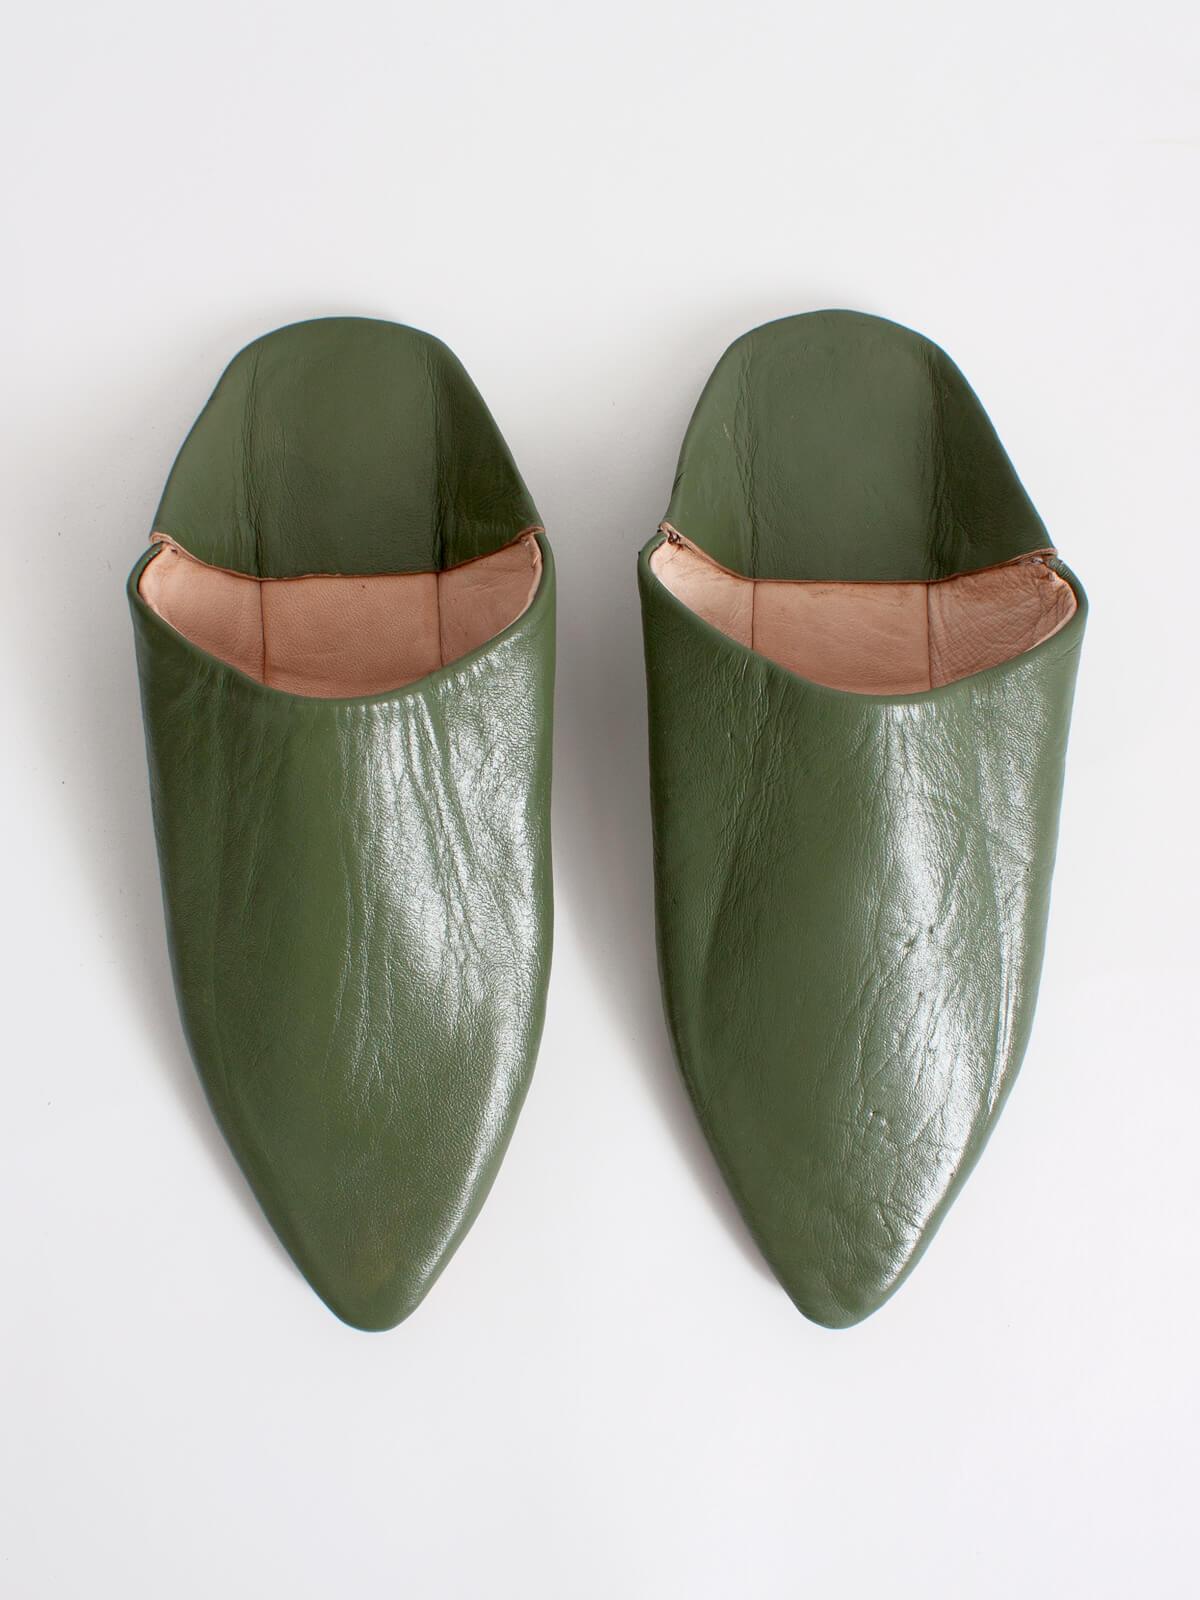 MOROCCAN CLASSIC POINTED BABOUCHE SLIPPERS, OLIVE/ MEN